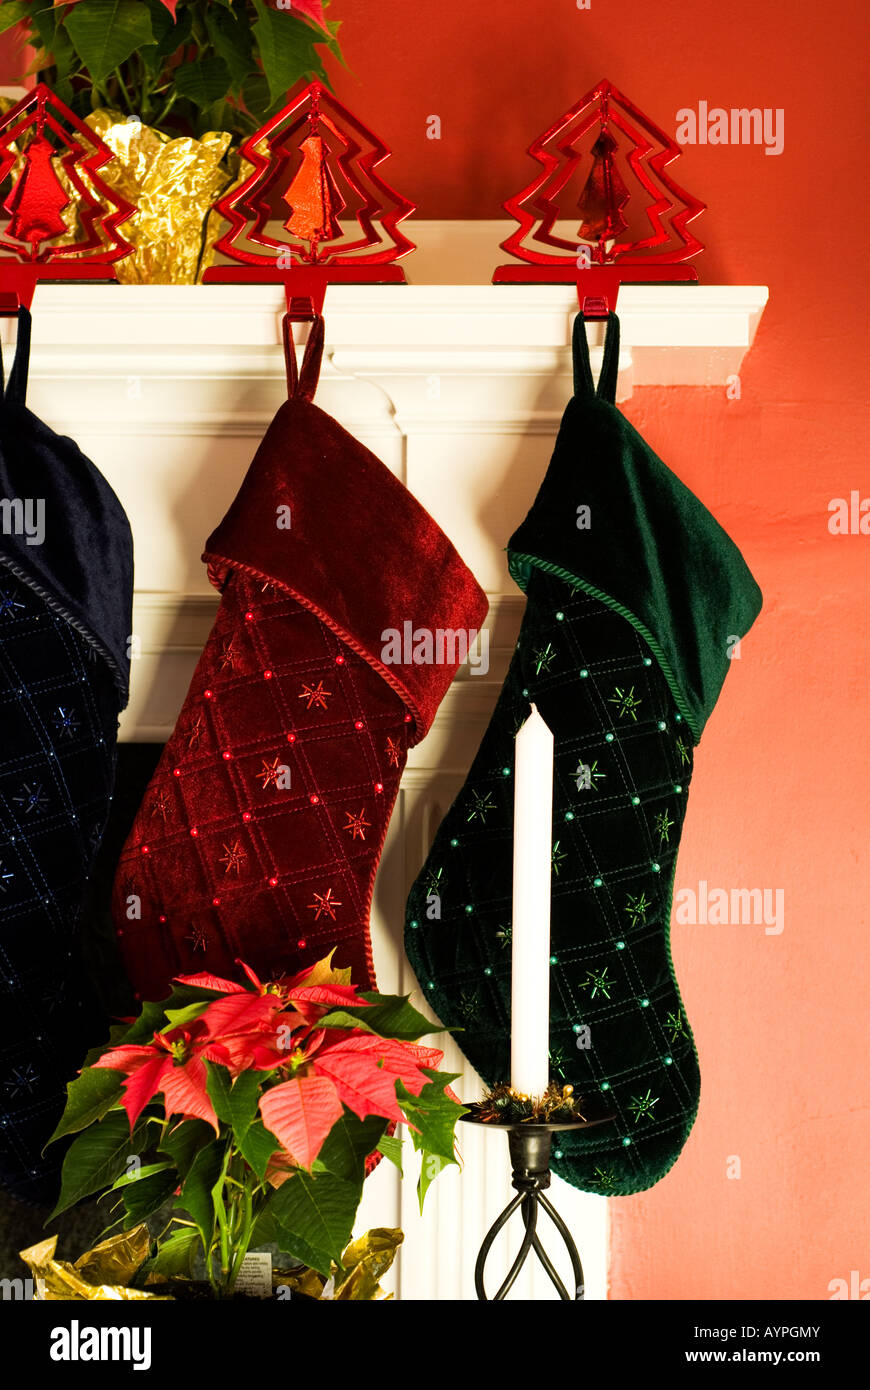 https://c8.alamy.com/comp/AYPGMY/christmas-stockings-hung-by-a-fireplace-AYPGMY.jpg